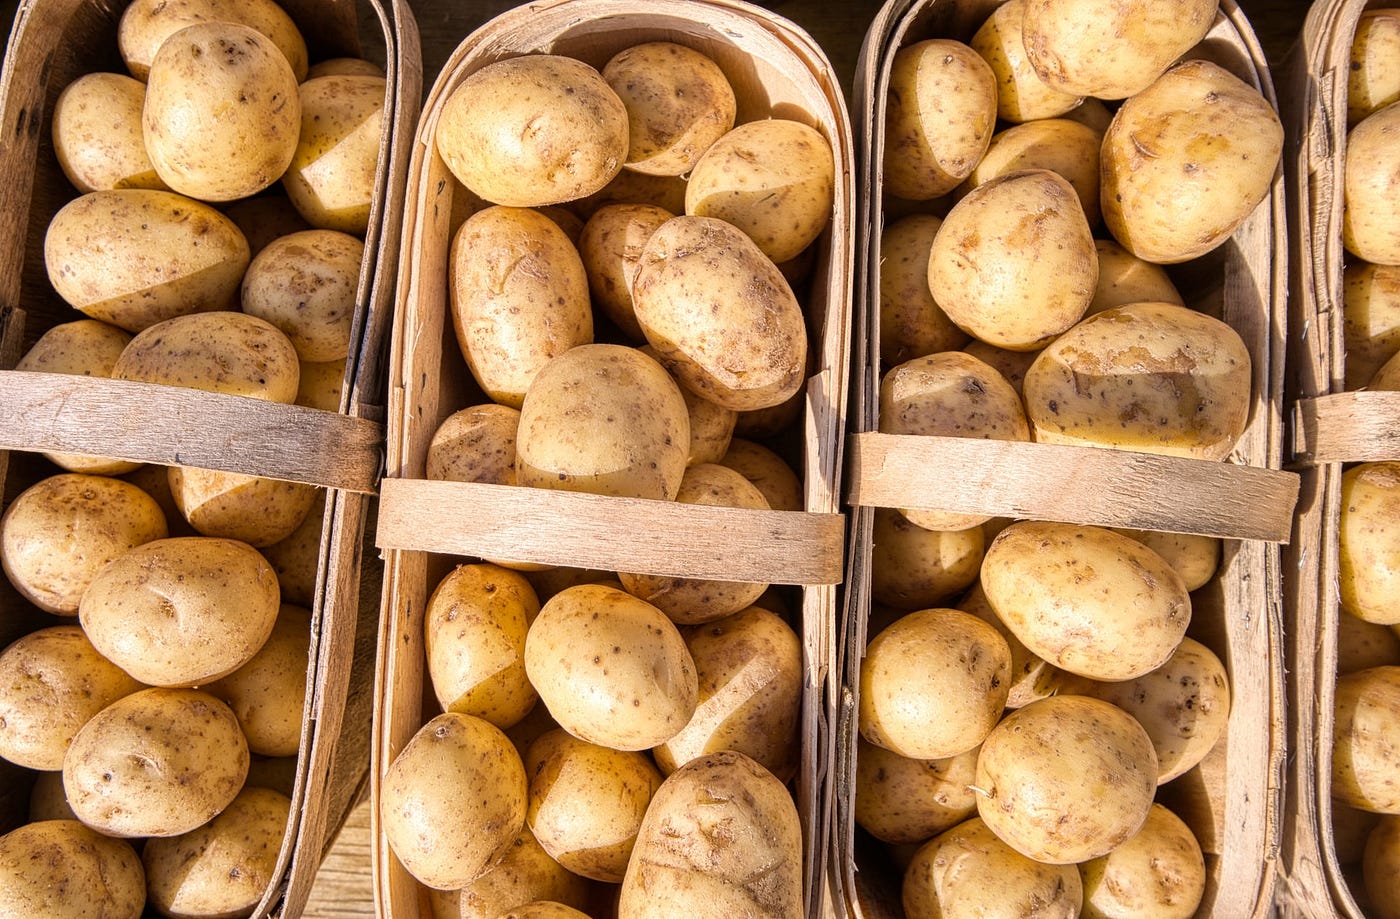 Horrific Tales of Potatoes That Caused Mass Sickness and Even